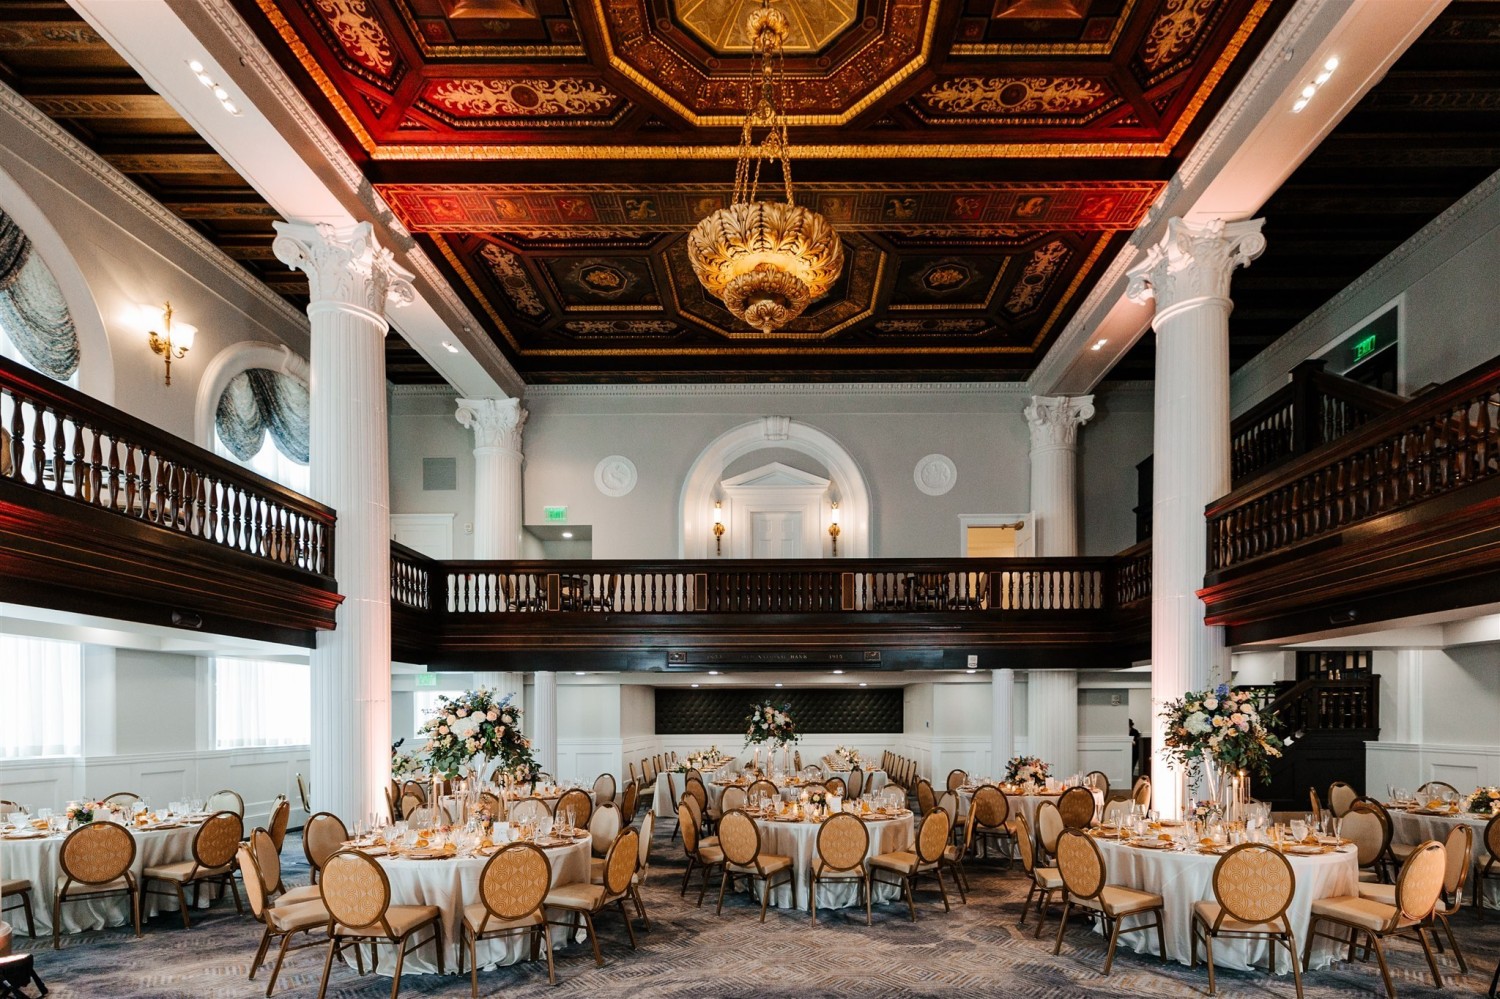 Amway Grand_Imperial Ballroom_Wedding_Set Up_Tables_Linen_Chairs_Flowers_Balcony_Mezzanine_Chandelier